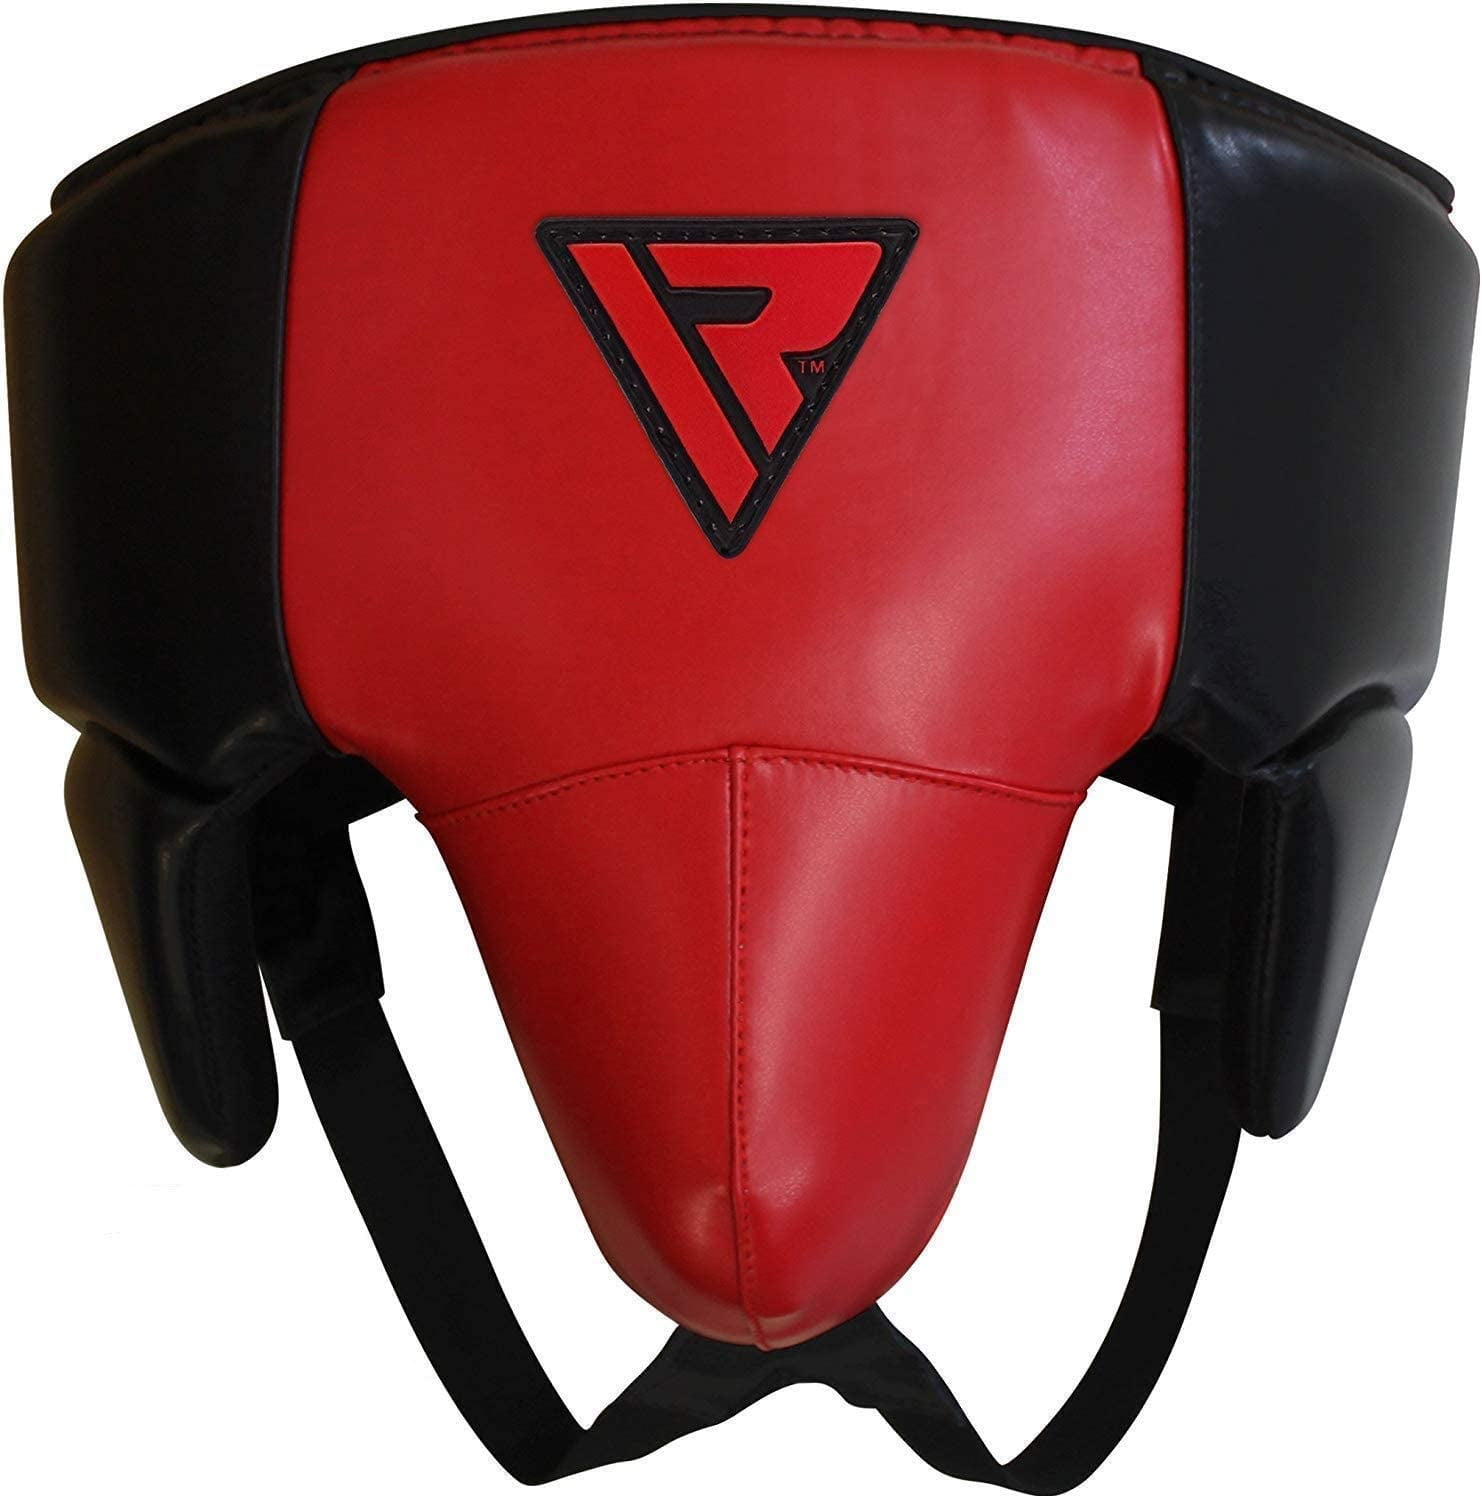 RDX Groin Guard Boxing Protector Cup Inside Safety Jock Strap MMA Muay Thai 